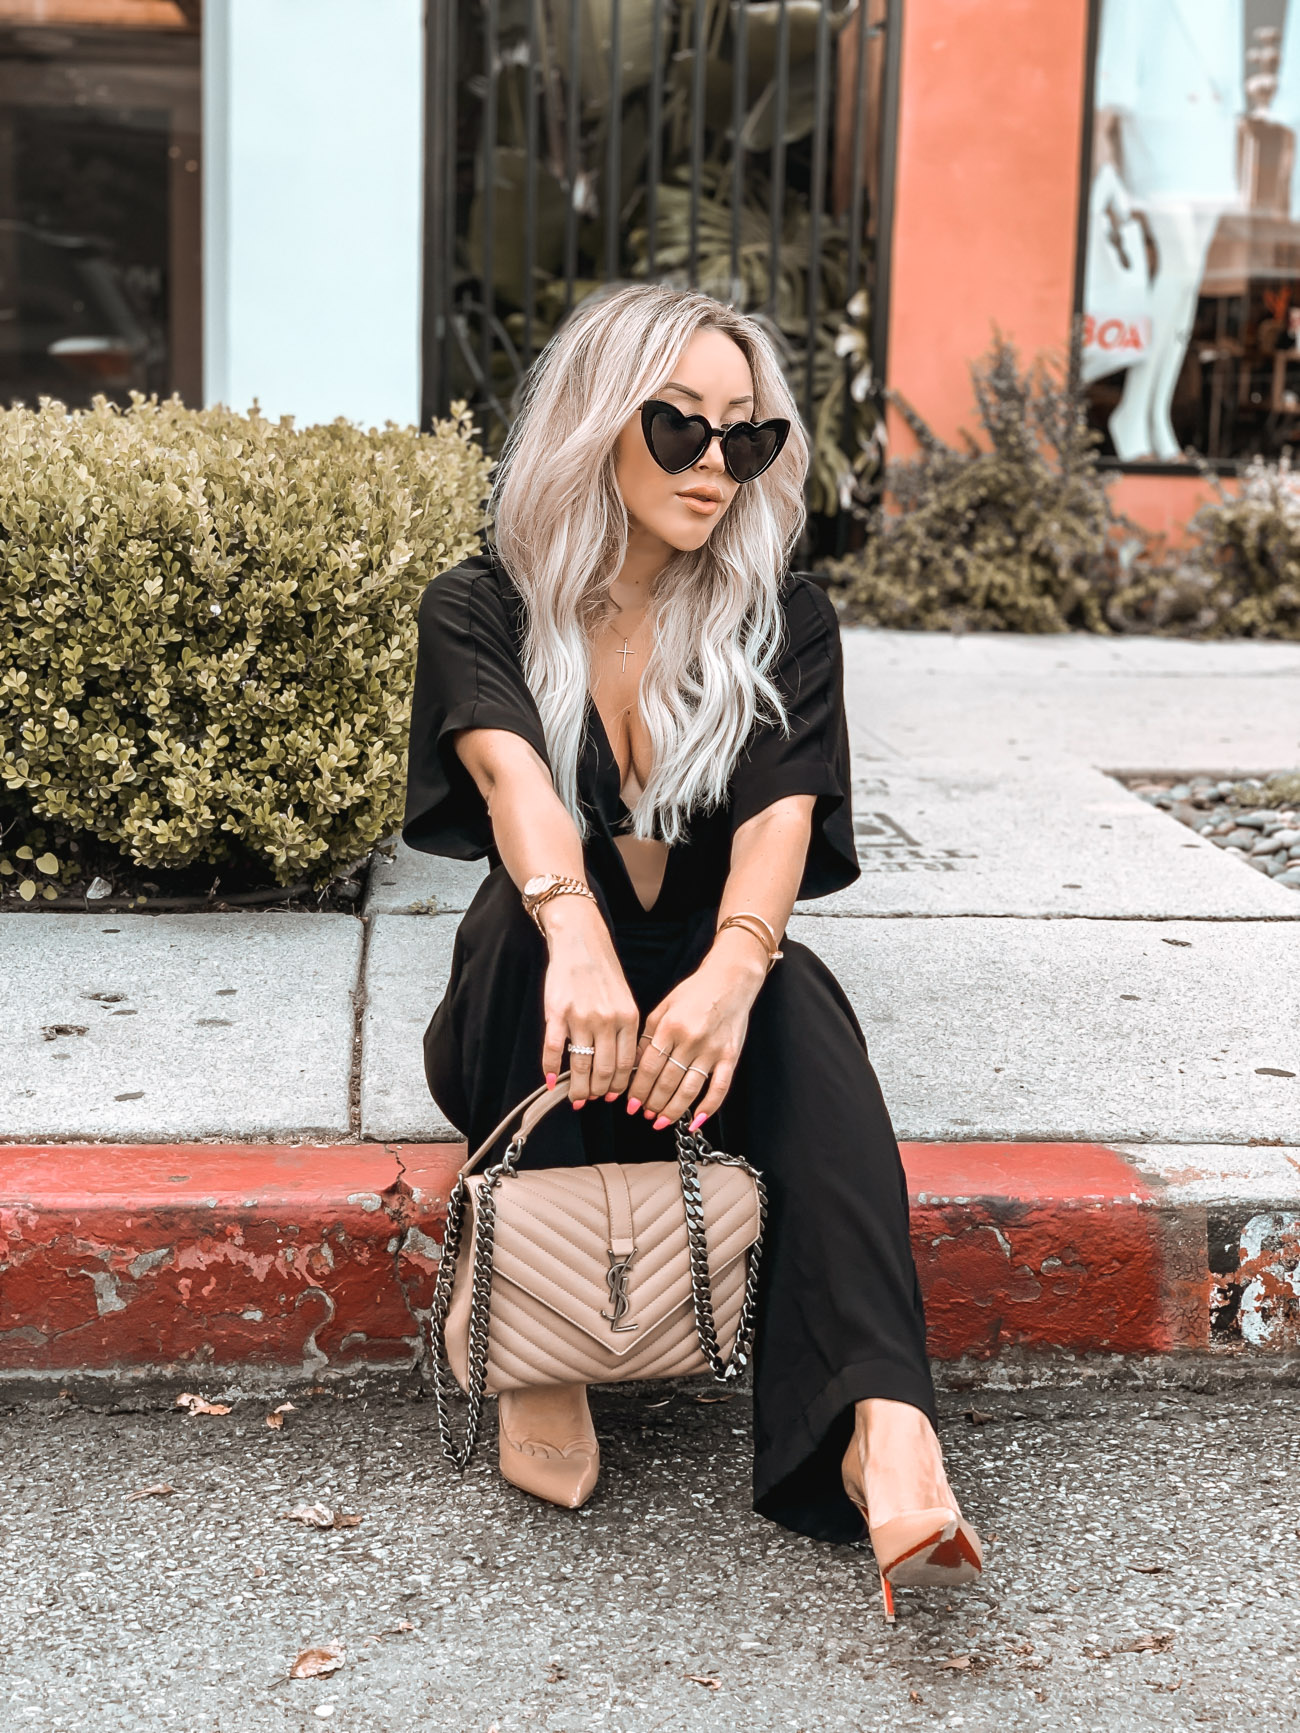 YSL College Bag | Nude Louboutin | Heart Sunglasses | Pairing Forever 21 w/ Designer Pieces | Blondie in the City by Hayley Larue 